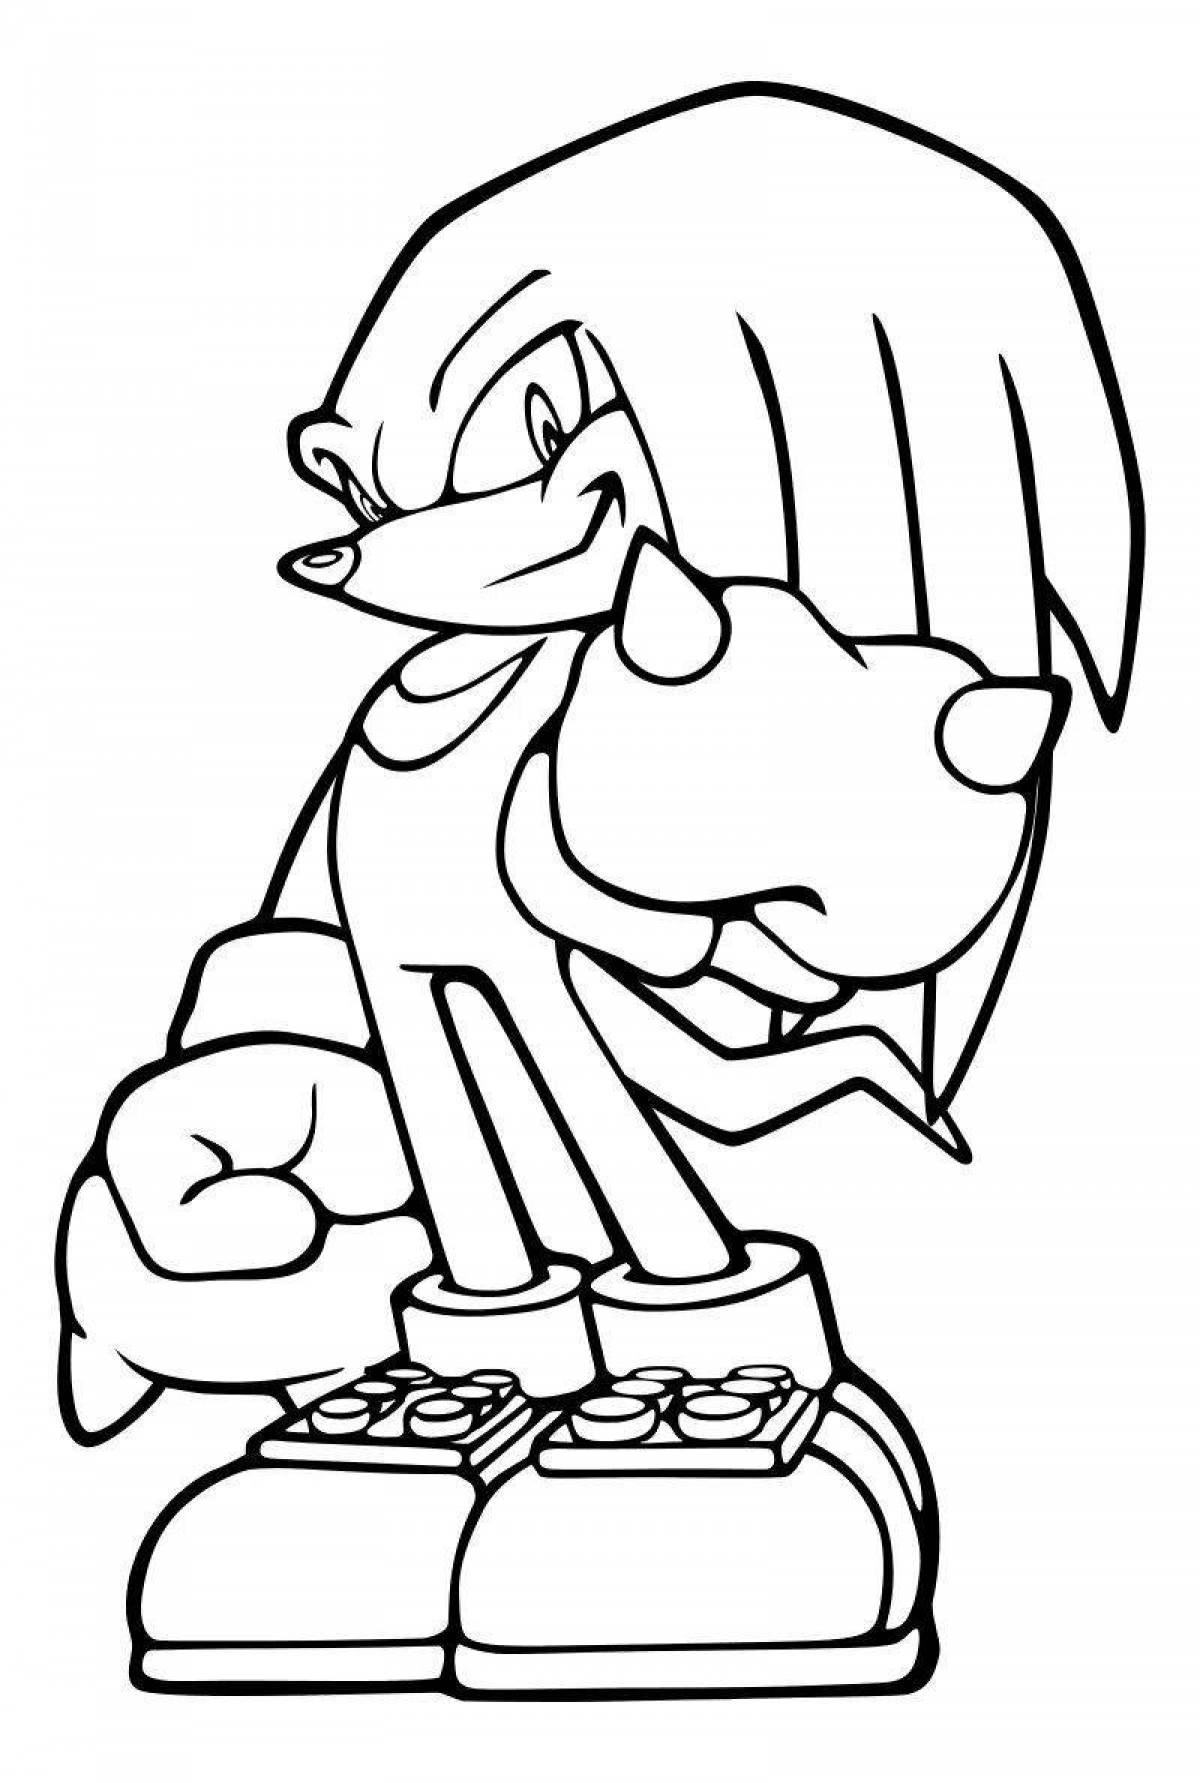 Knuckles the echidna coloring page